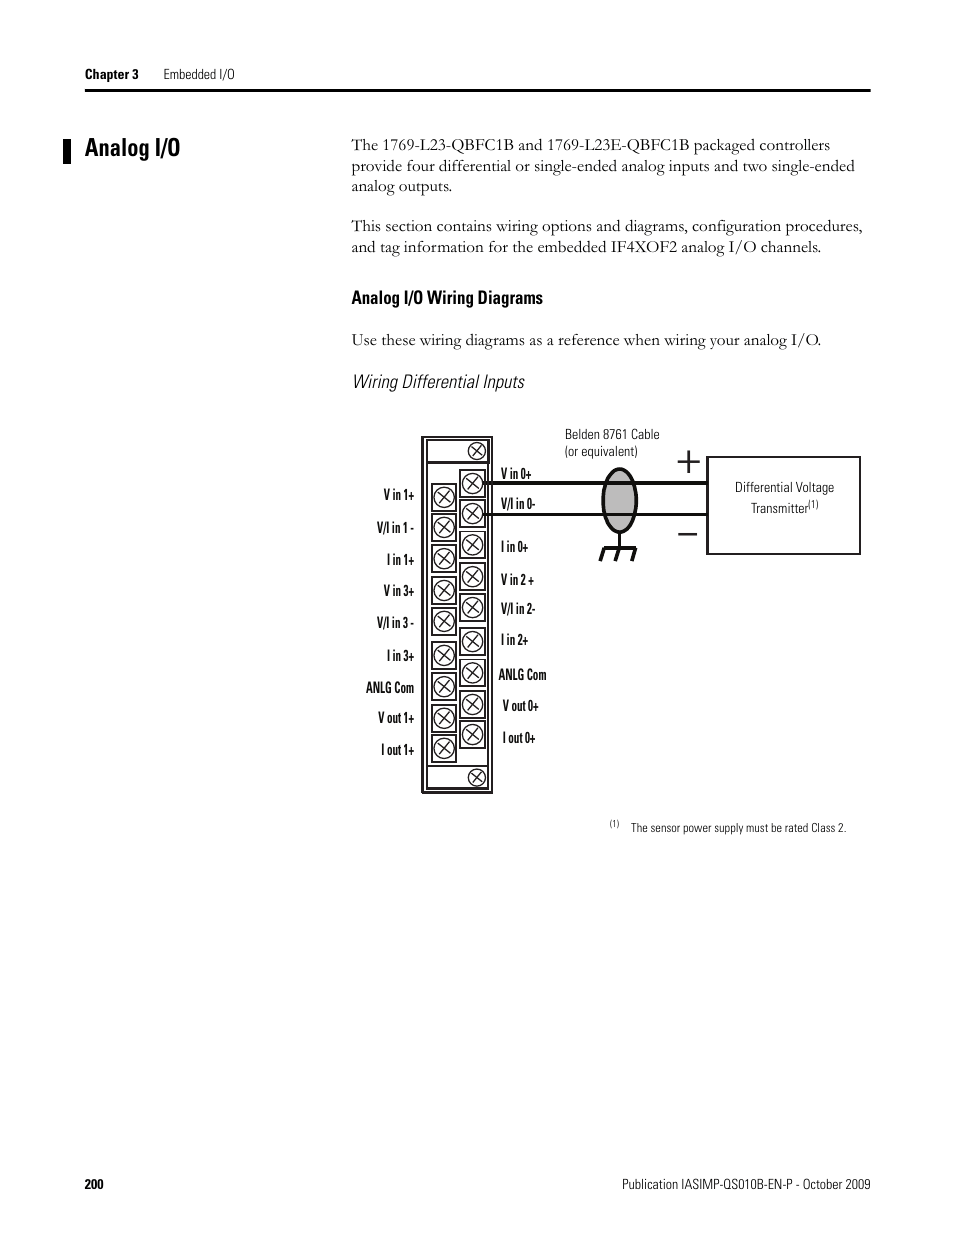 1957 Chevy Bel Air Ignition Switch Wiring Diagram